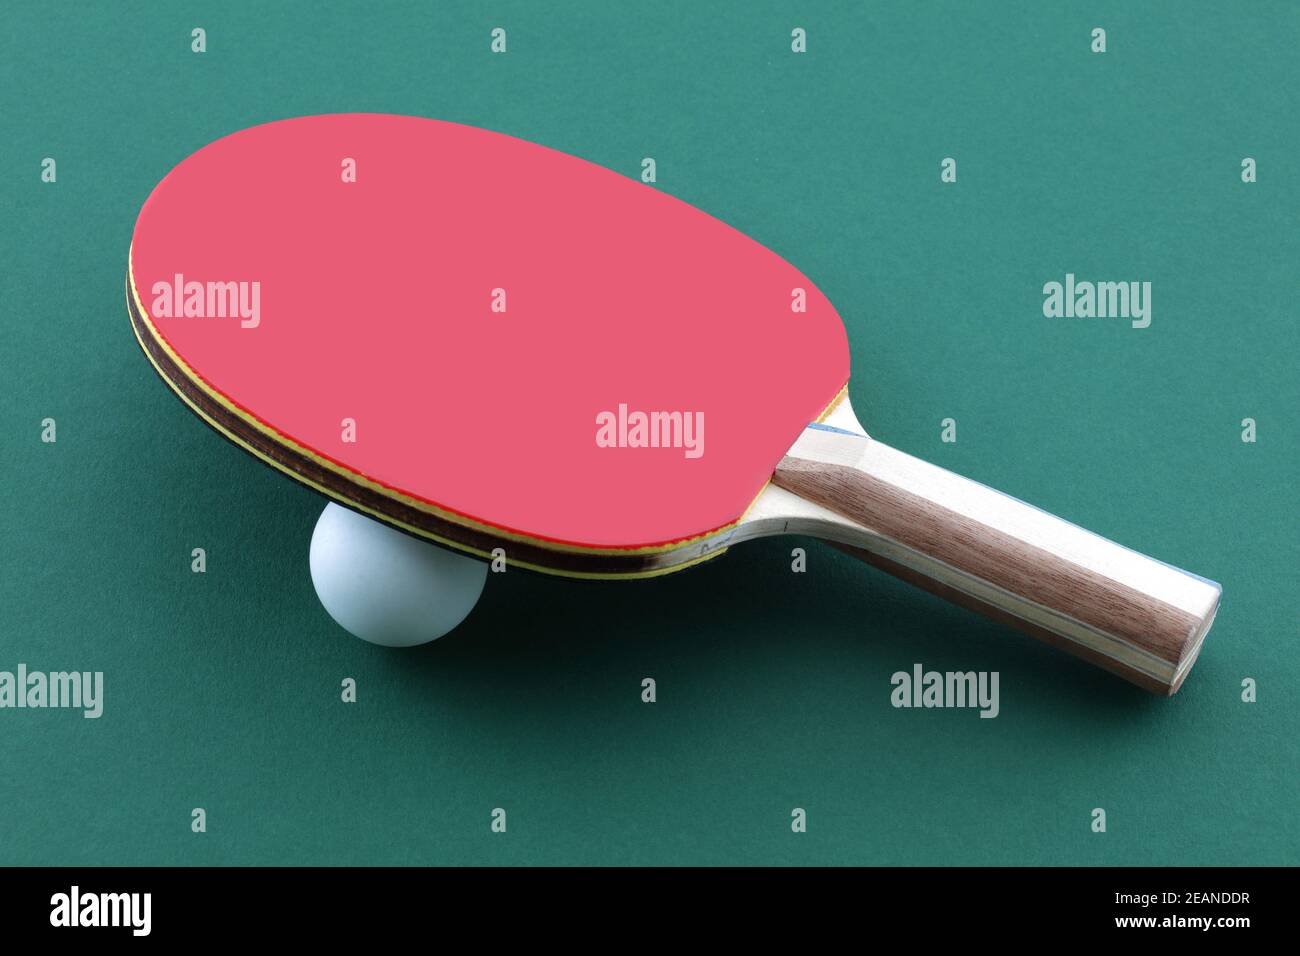 Table tennis bat and white ball on green table ping pong paddle Stock Photo